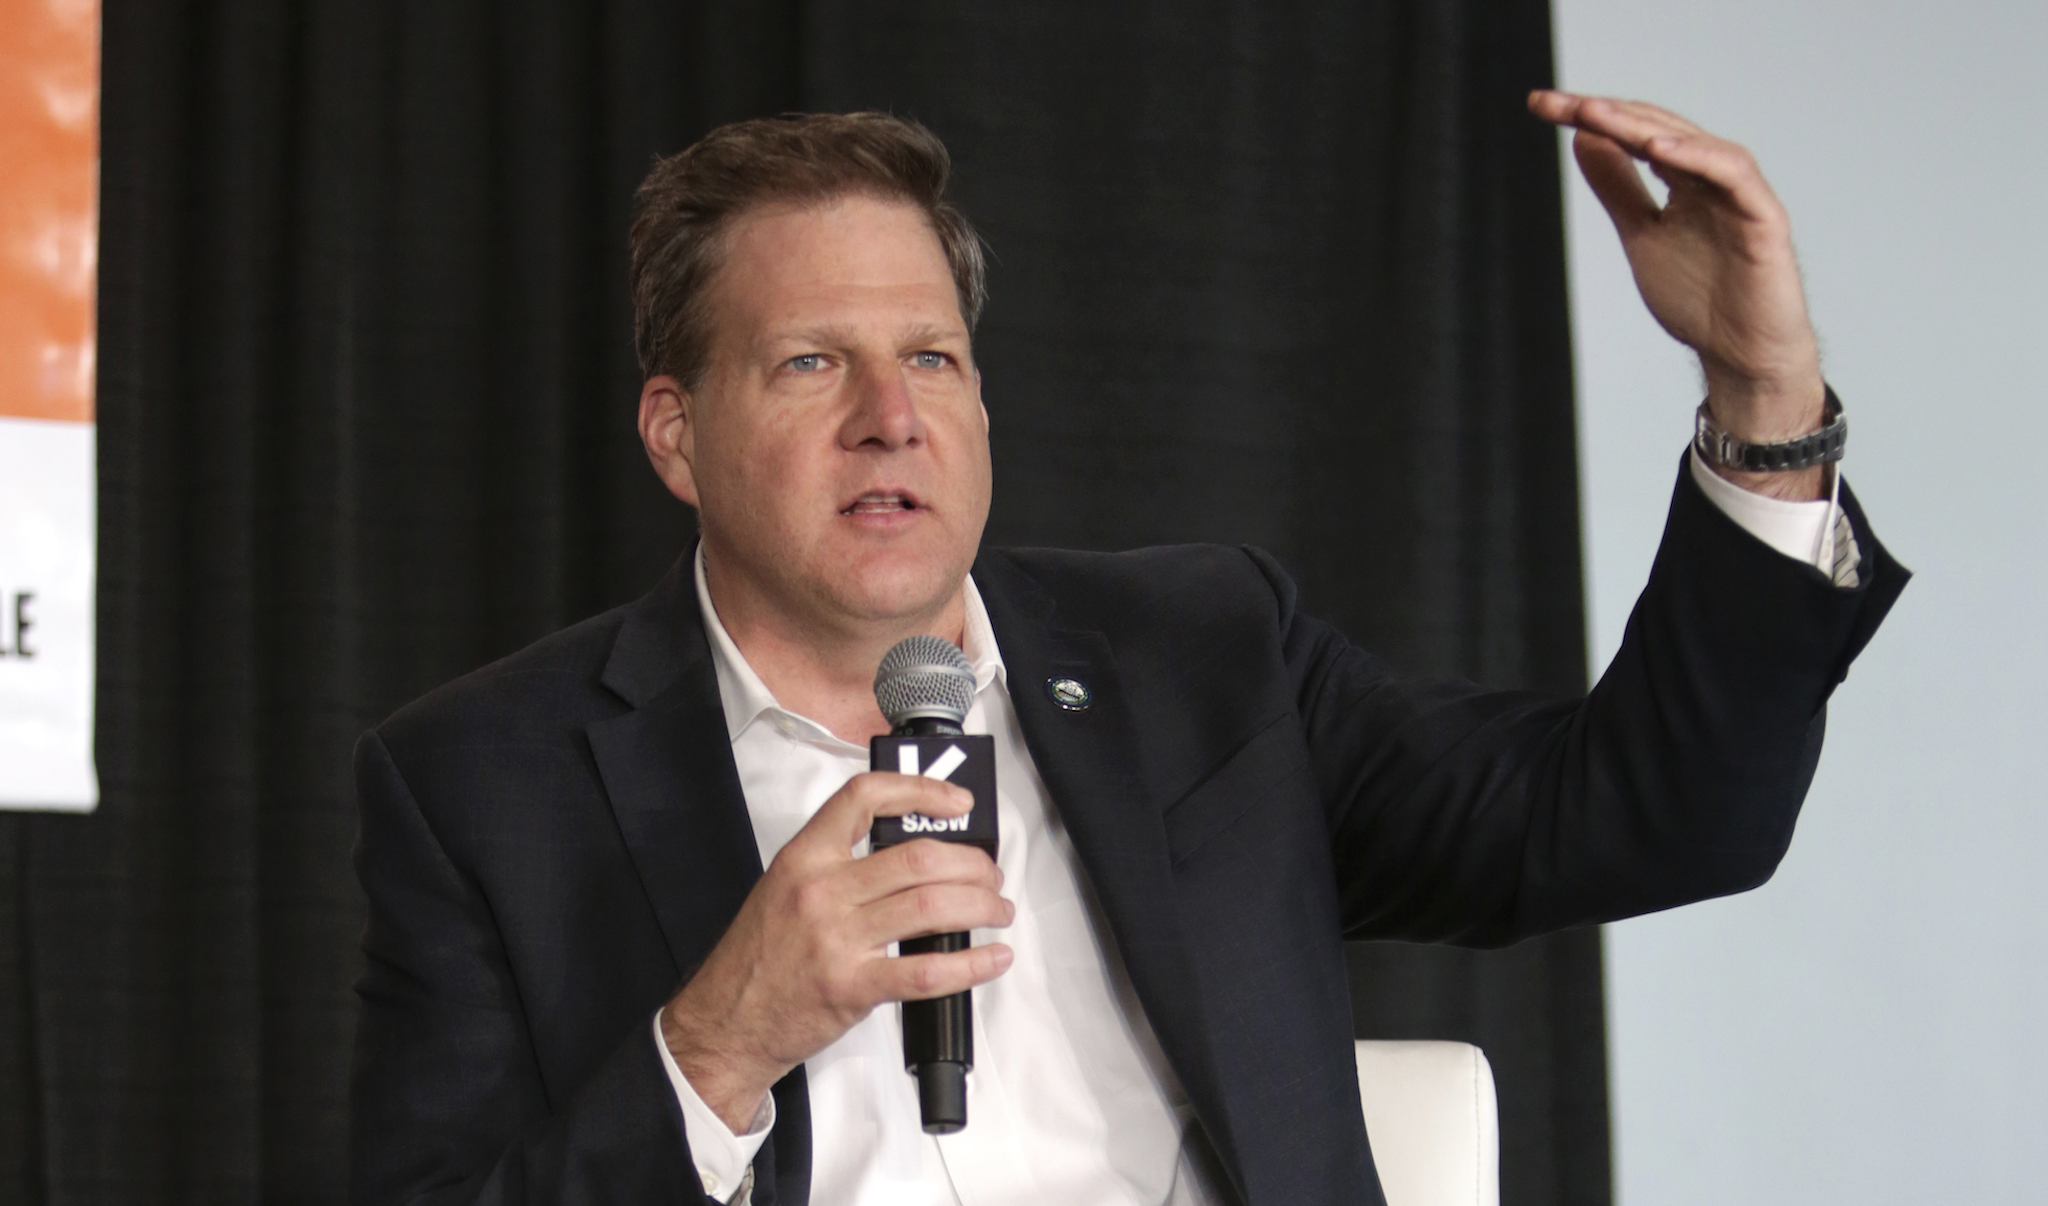 AUSTIN, TEXAS - MARCH 12: Christopher Sununu speaks onstage at the "The Future of American Conservatism" during the 2023 SXSW Conference and Festivals at The LINE Austin on March 12, 2023 in Austin, Texas.